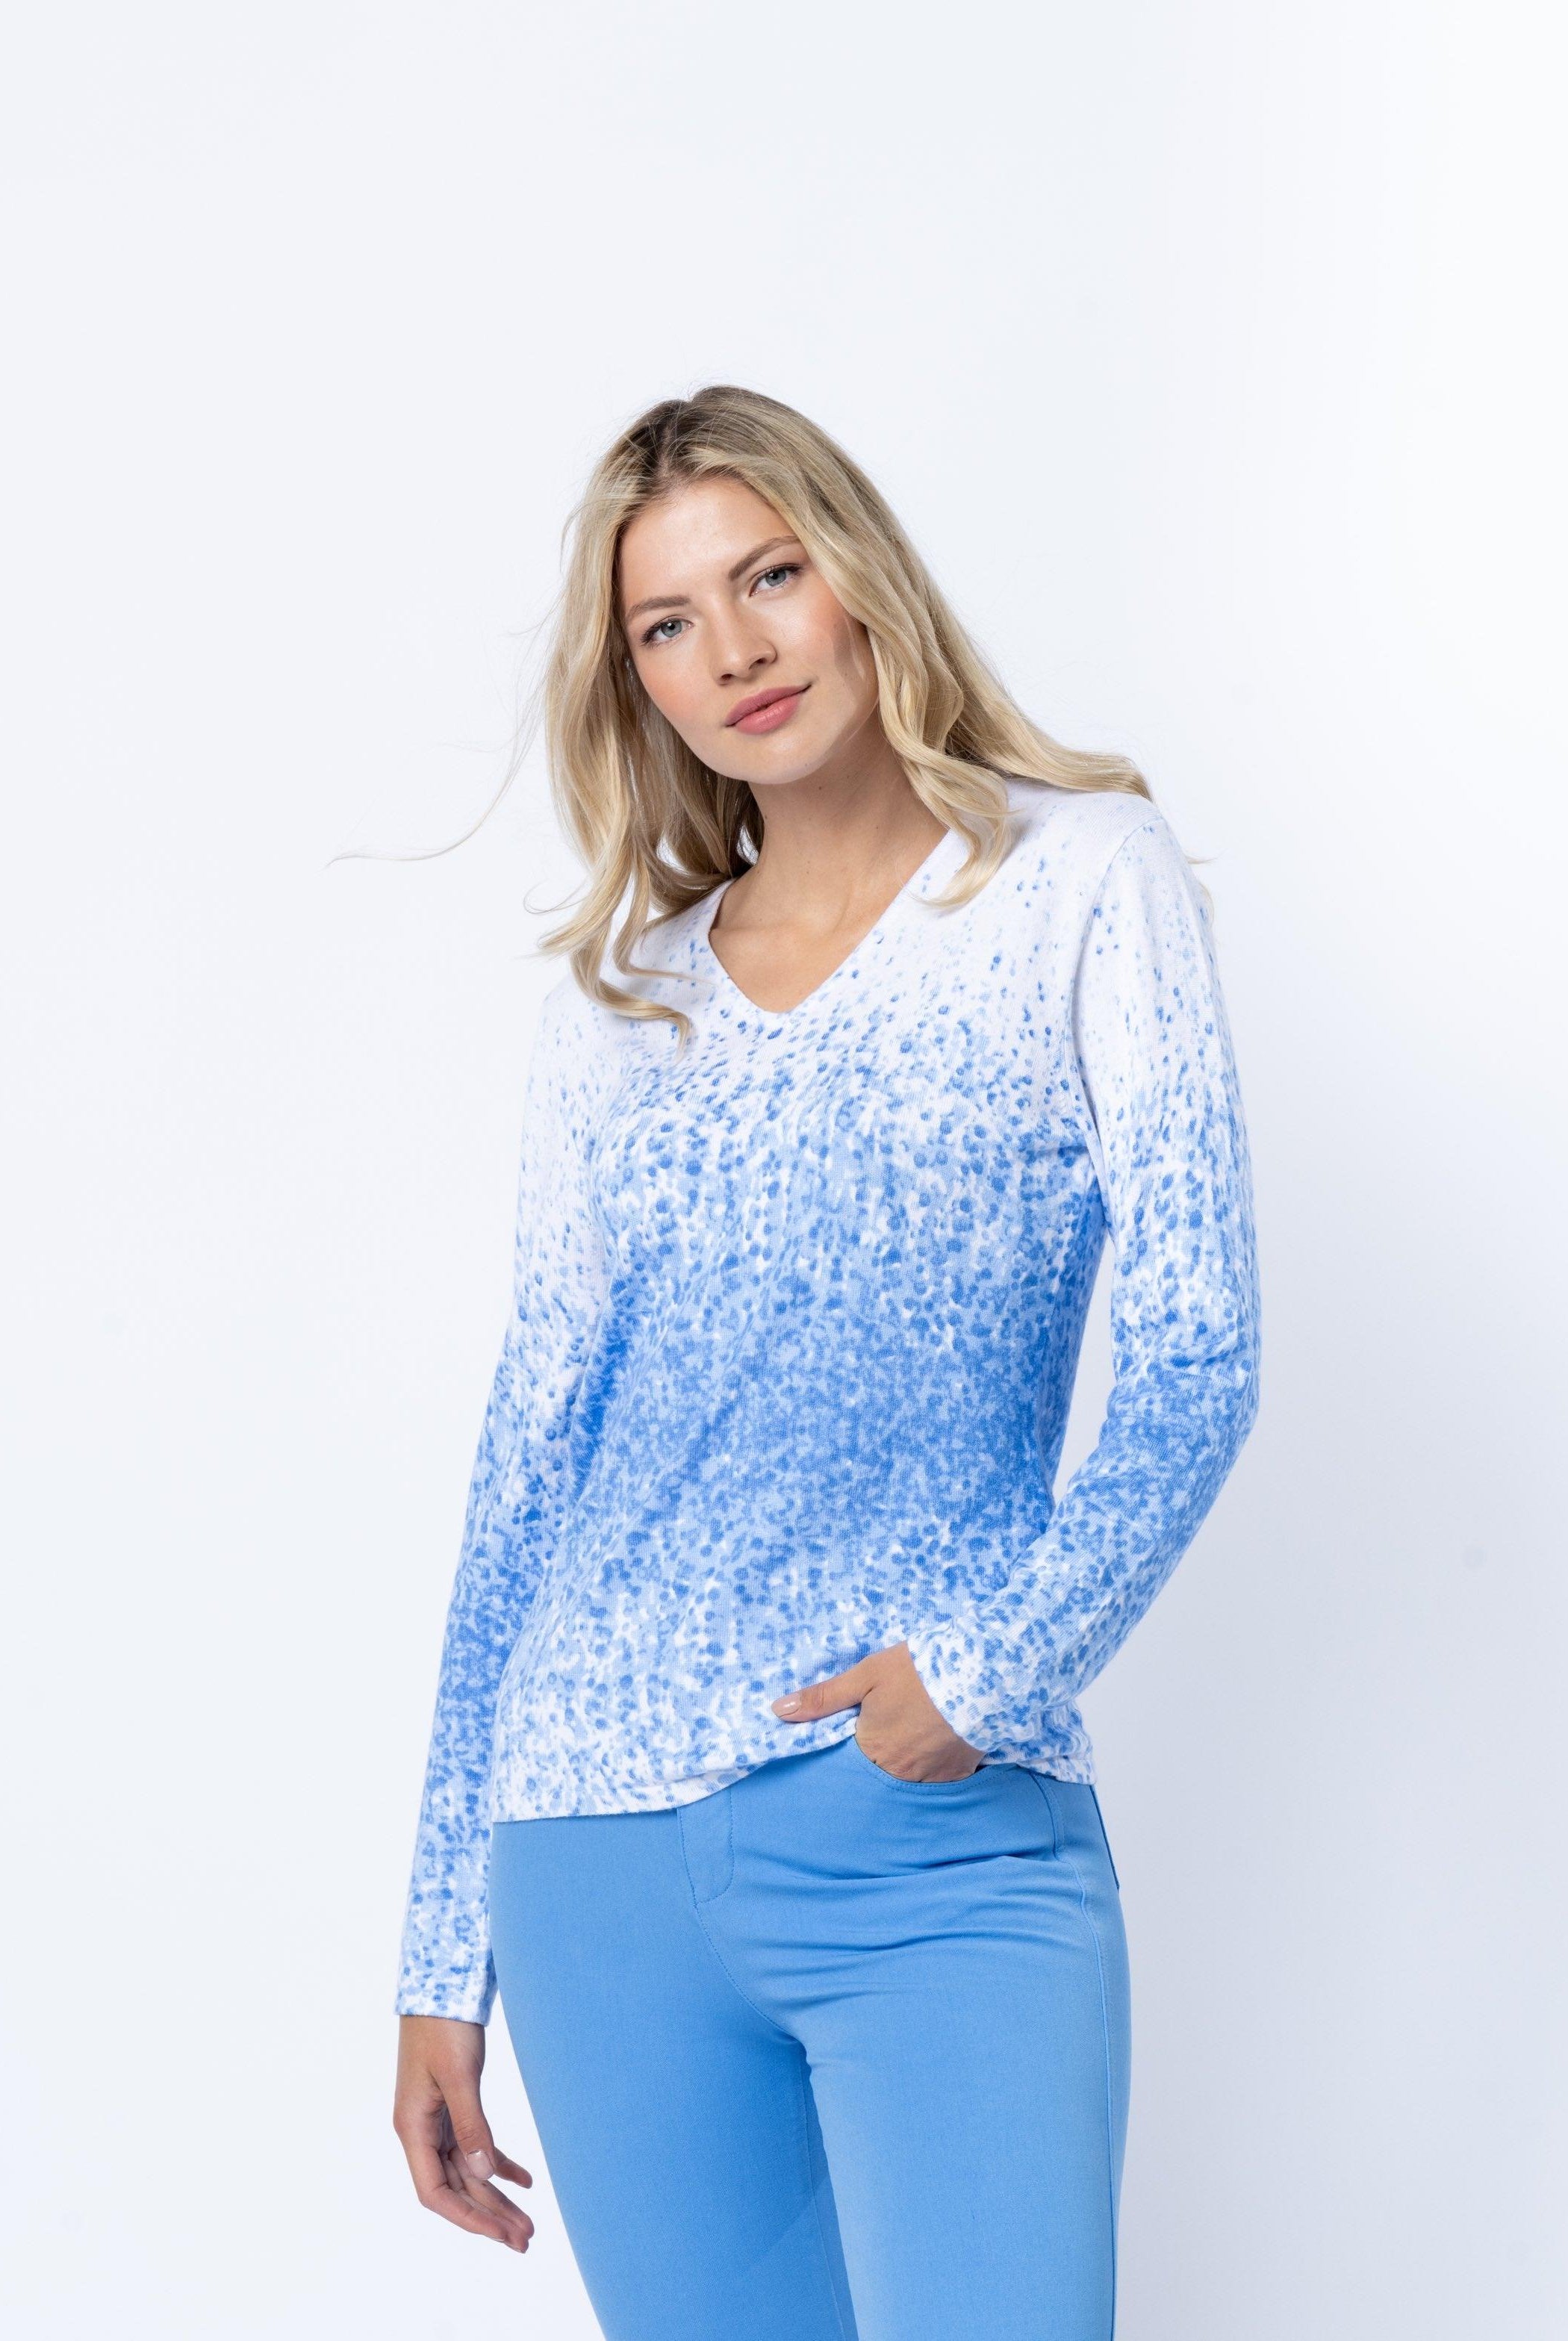 MARBLE Classic Sweater 6504 - Solitaire Fashions Darwen